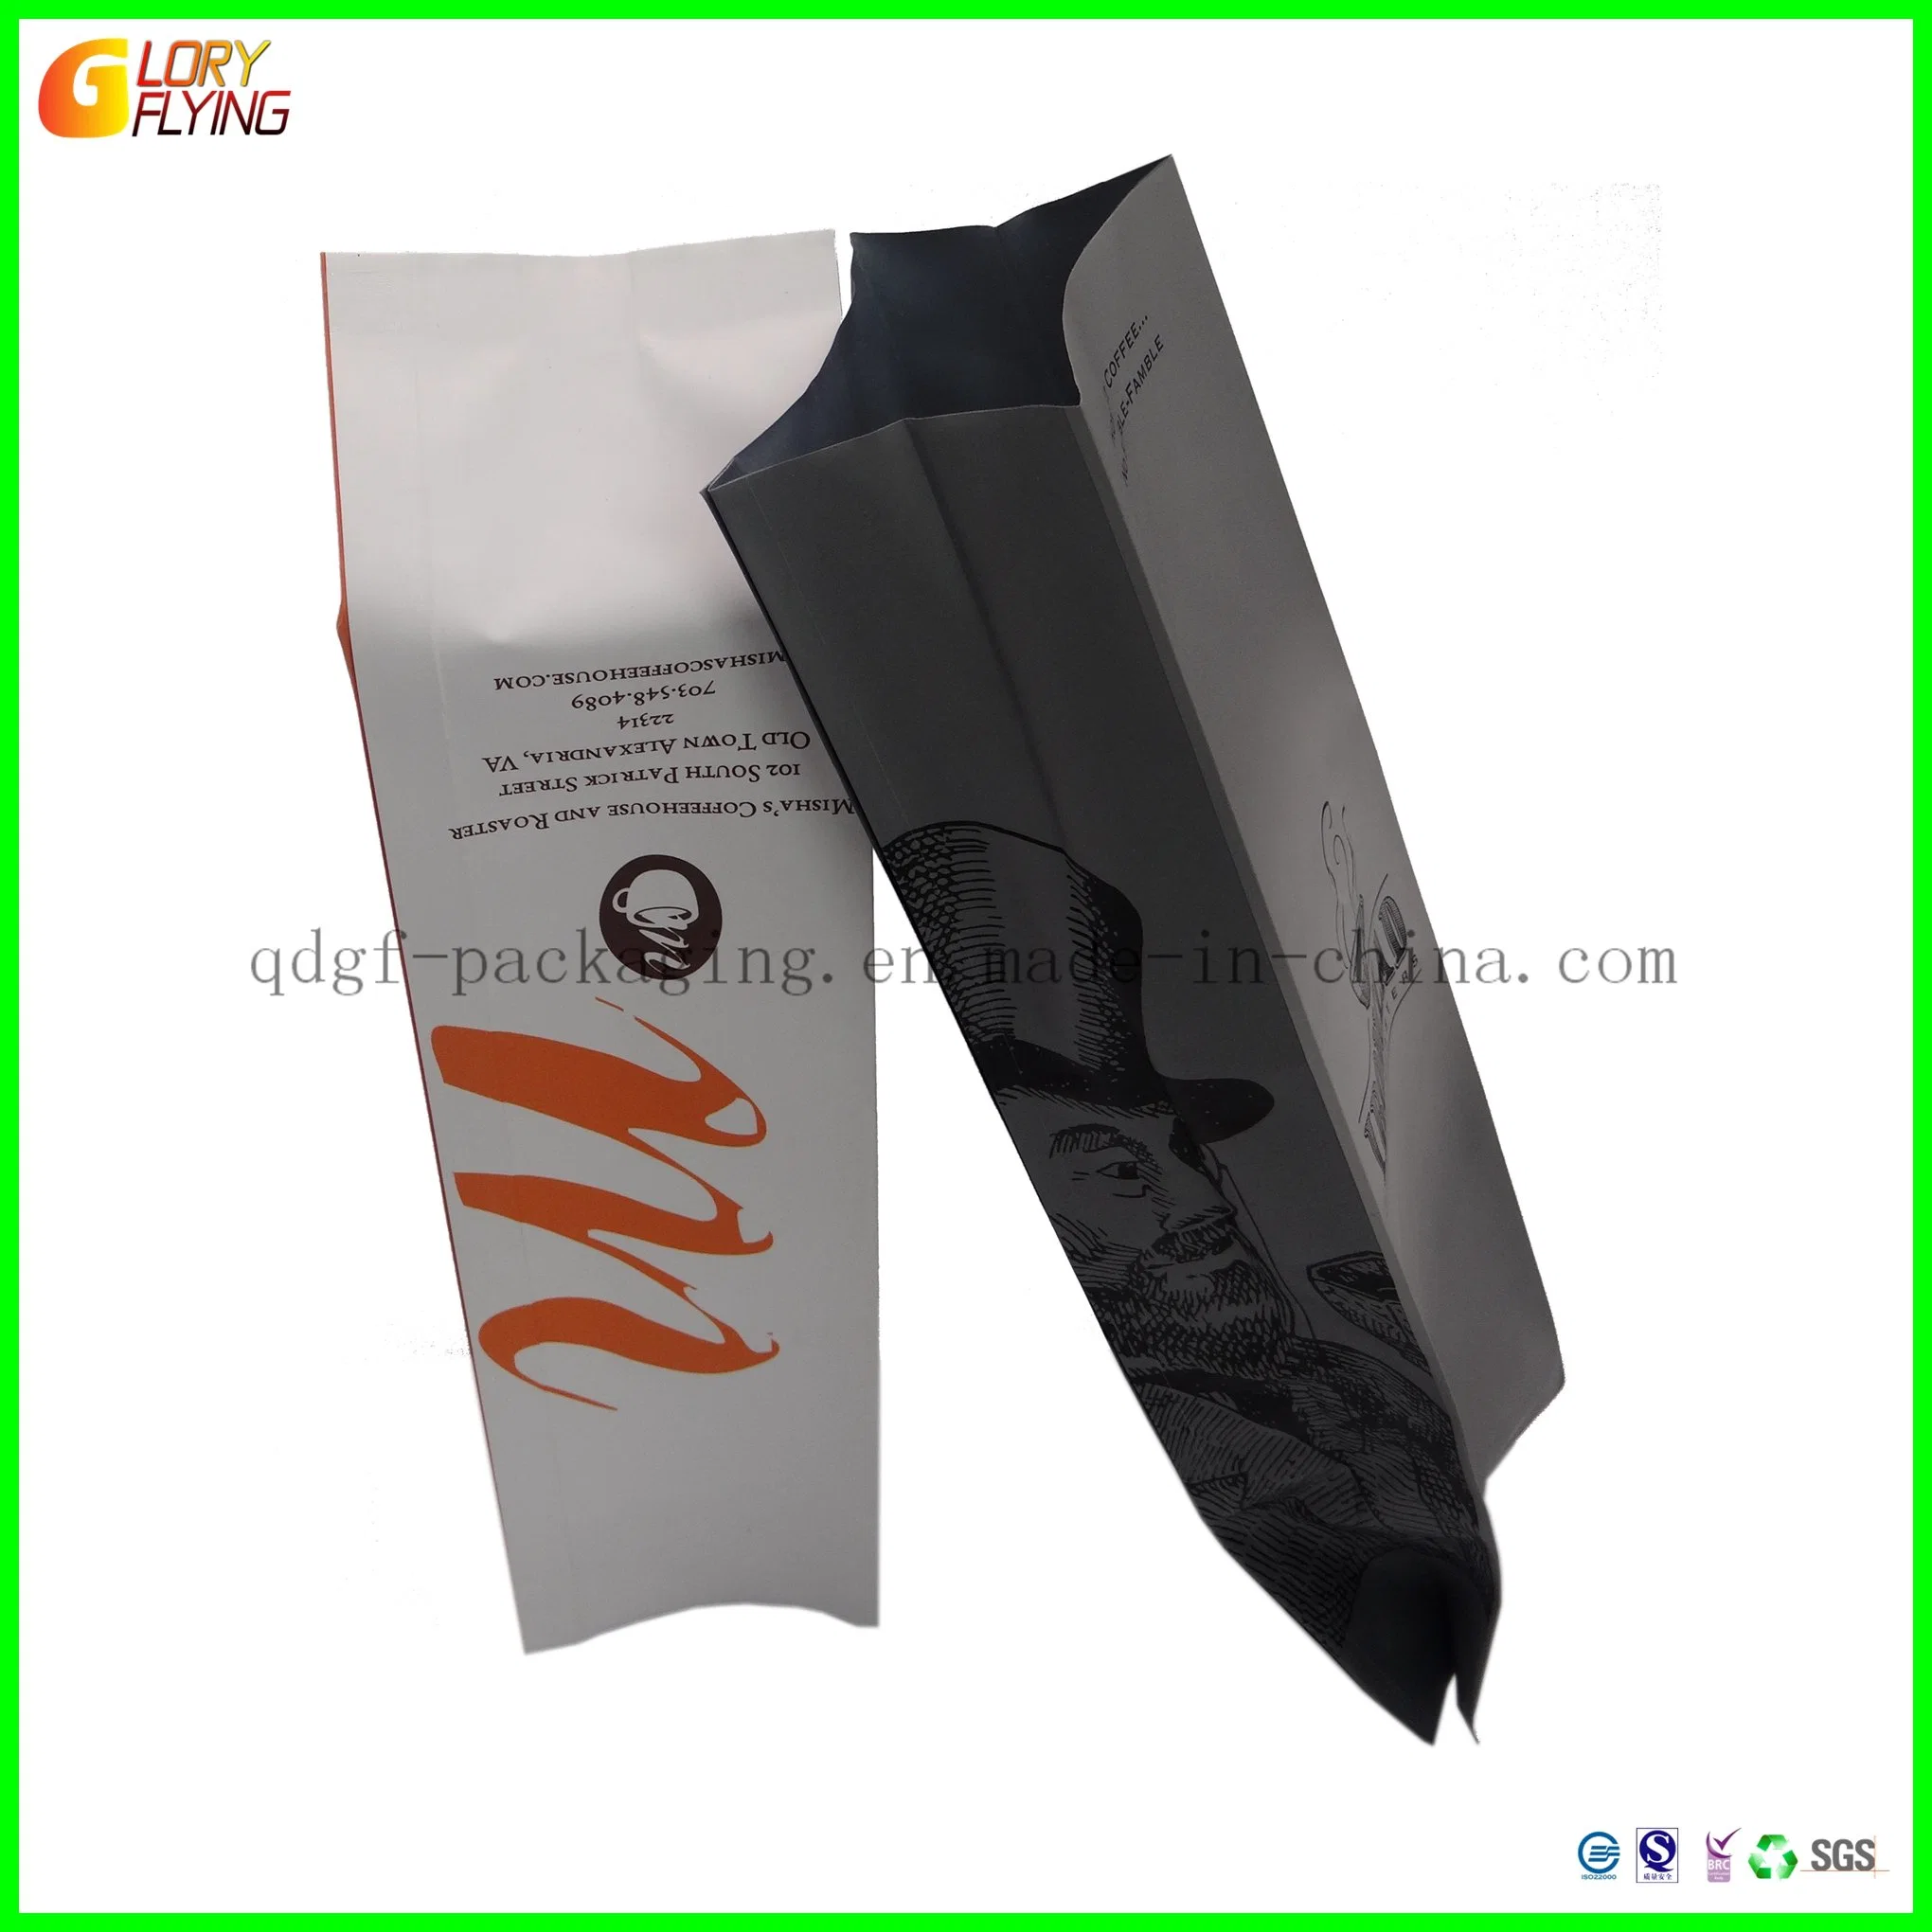 Custom Production of Coffee Paper Bags, Frozen Seafood, Edamame Beans, Fruit Salad, Pet Food, and So on All Kinds of Packaging Bags. Plastic Bag.